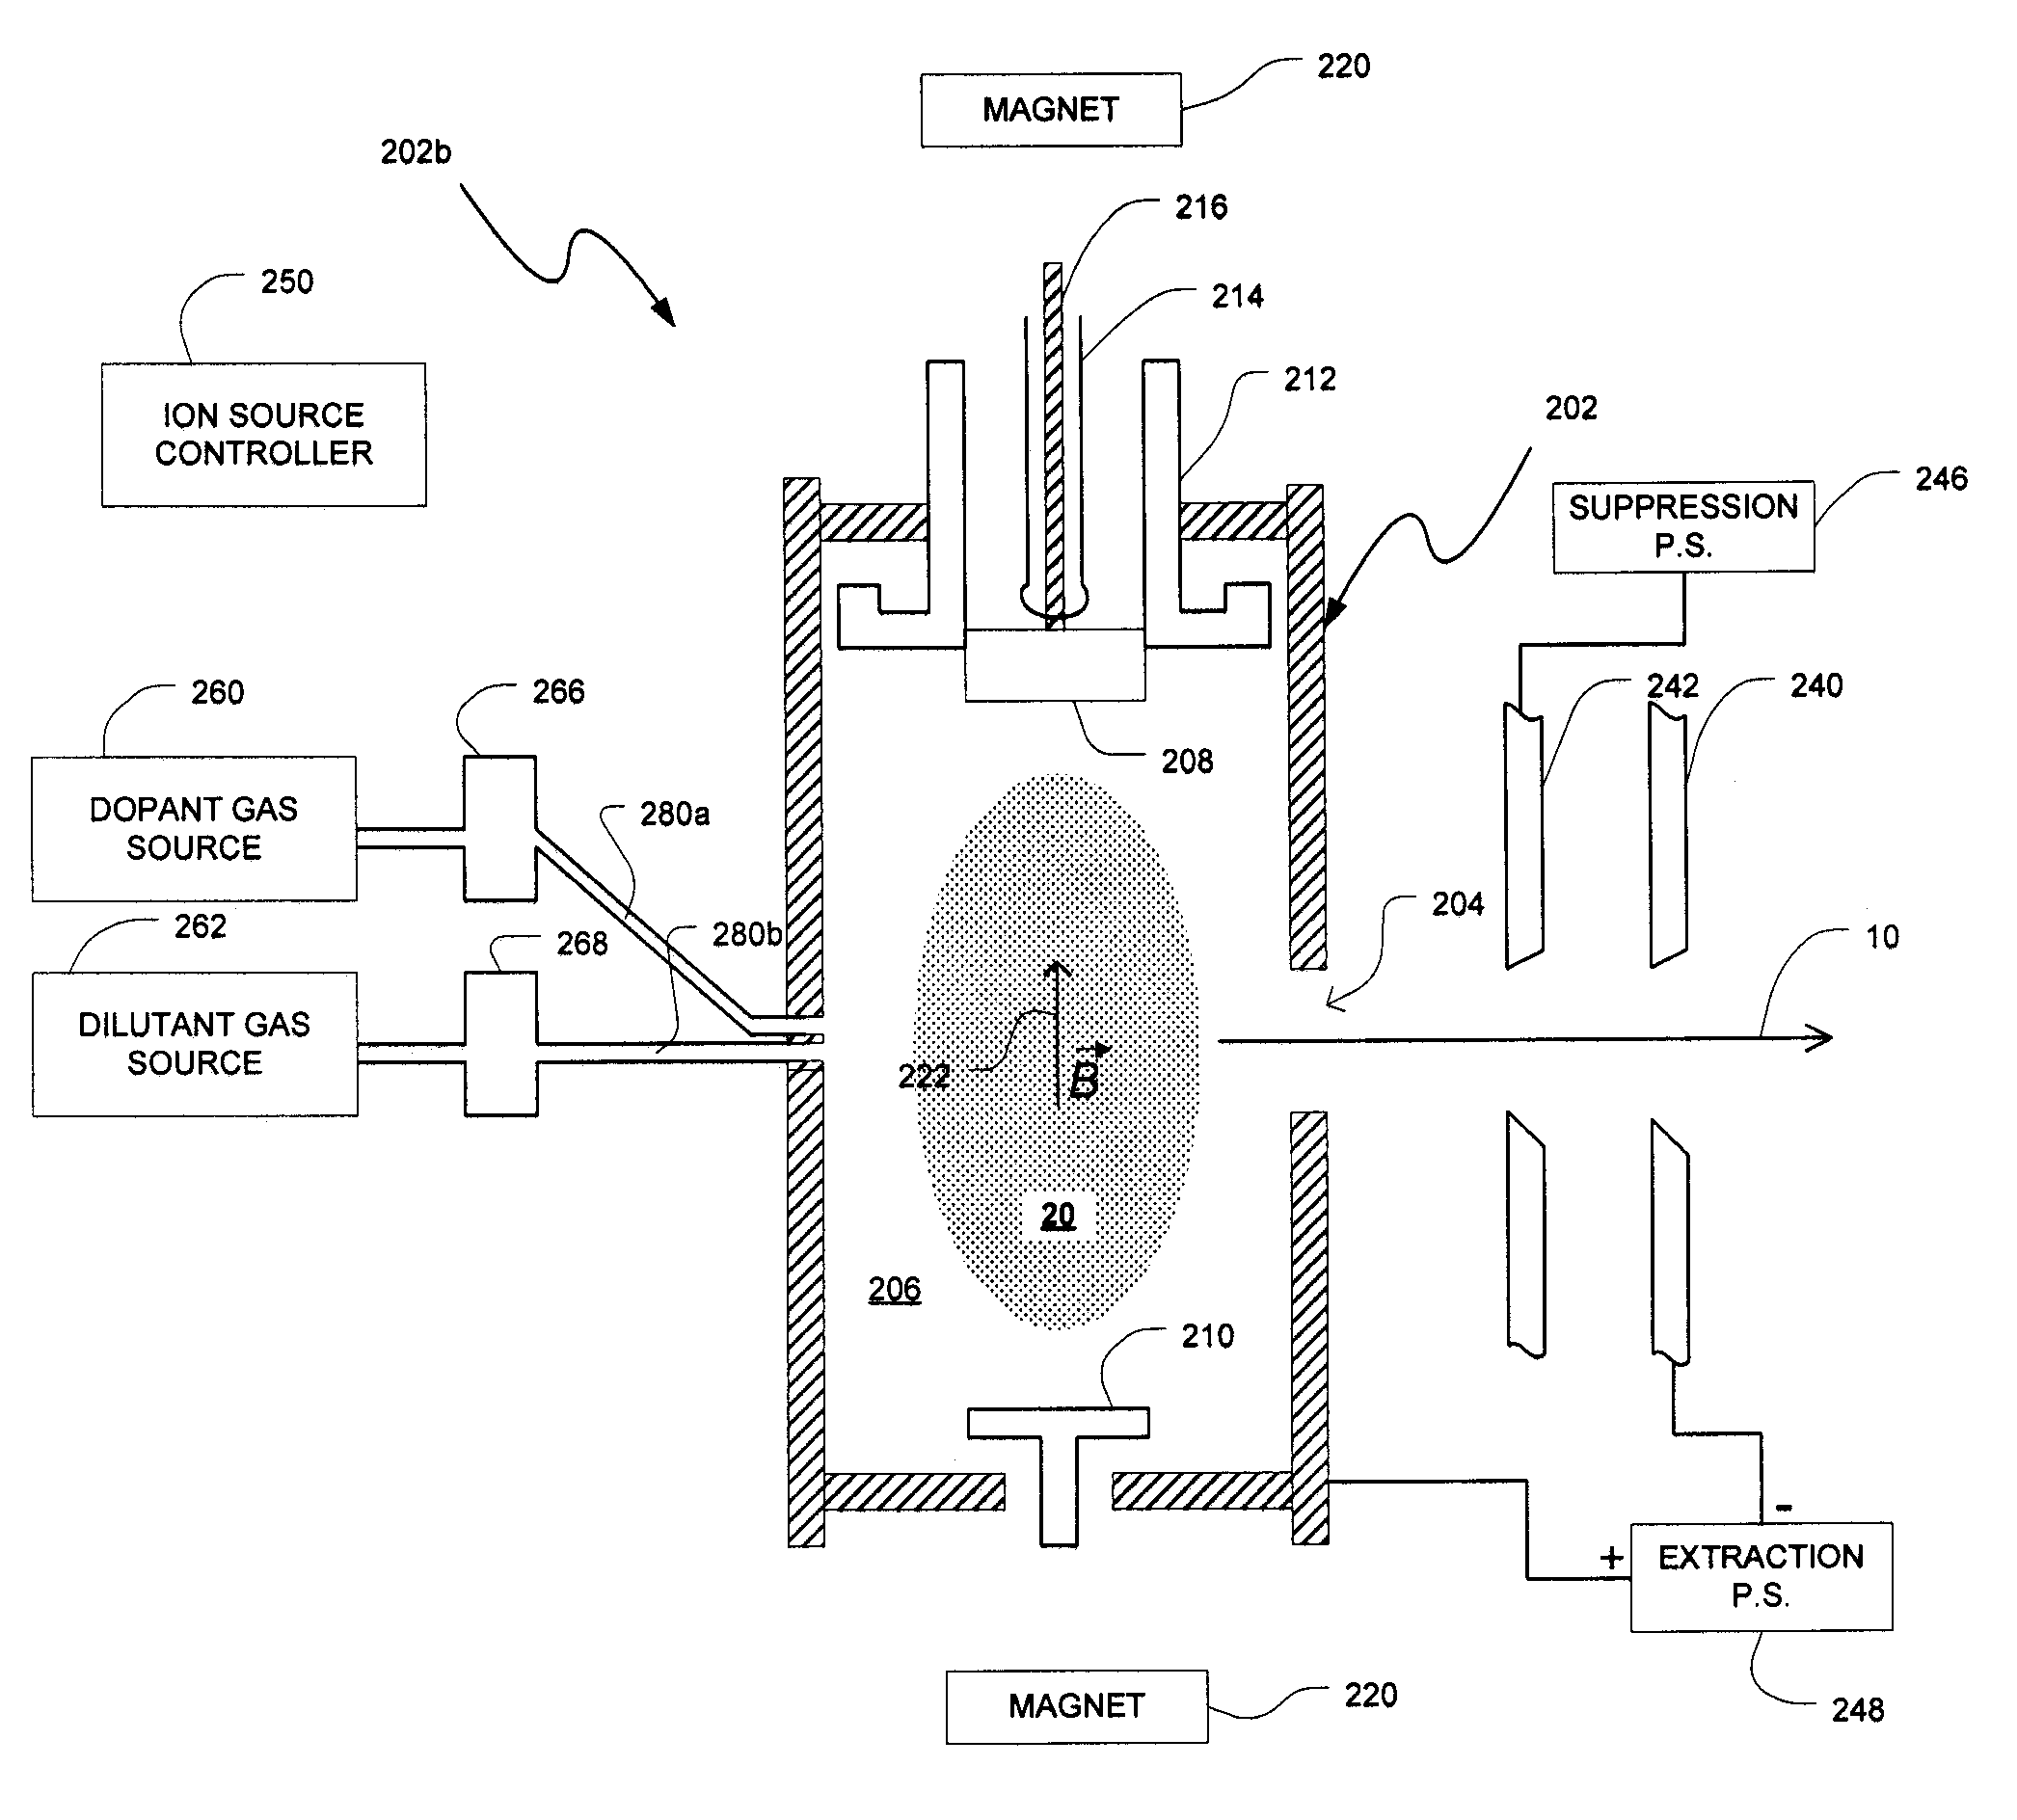 Techniques for improving the performance and extending the lifetime of an ion source with gas mixing